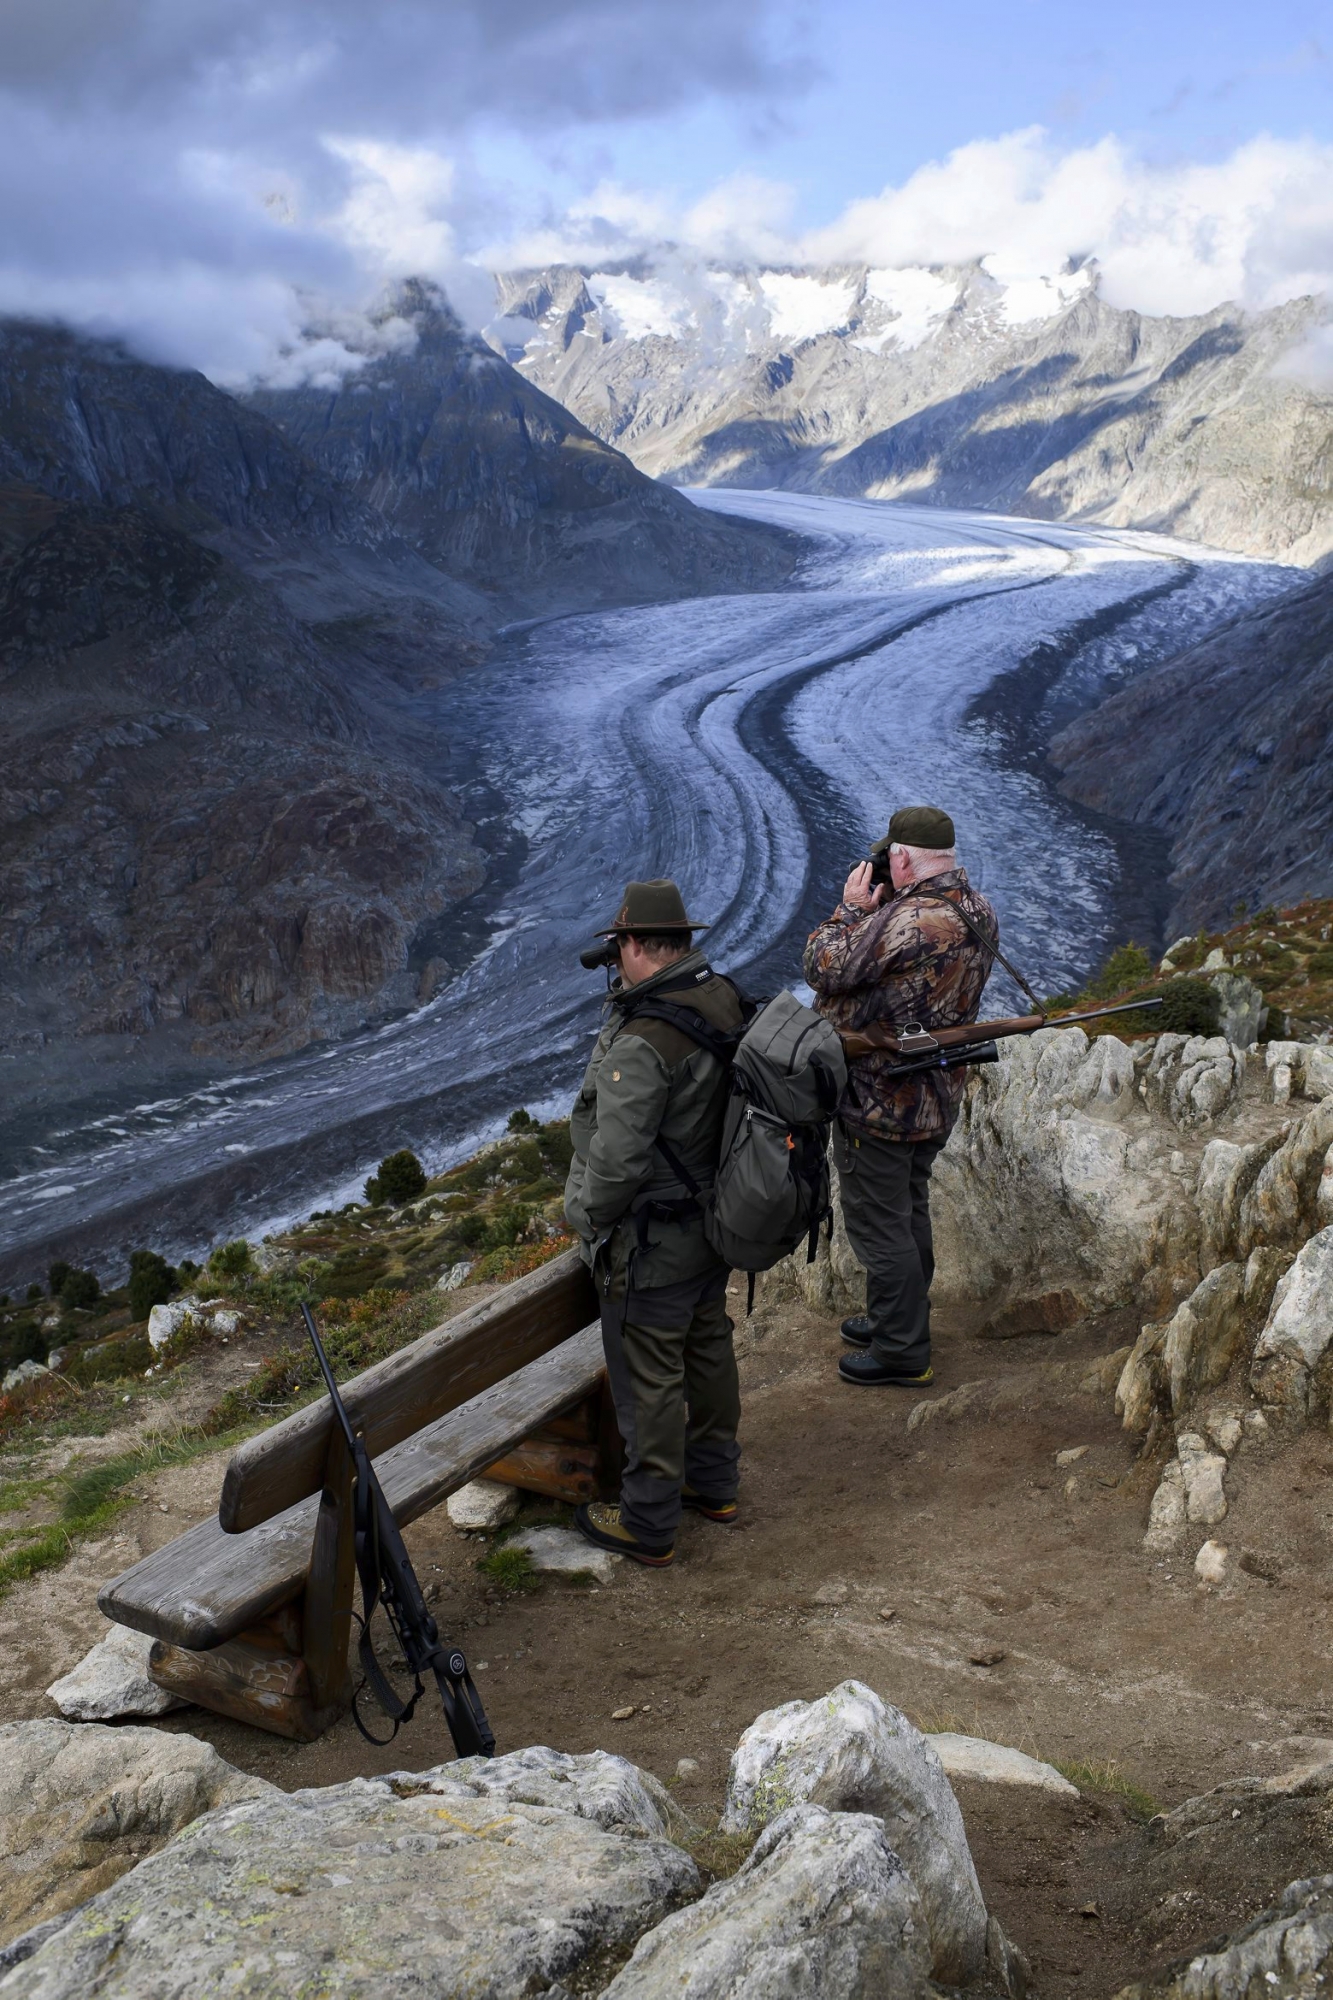 Two Hunters observe the wildlife next to the Swiss Aletsch Glacier during an autumn day above Bettmeralp in Wallis, Switzerland, on Monday, 23 September 2019. The Swiss Aletsch glacier, one of the largest ice streams in Europe, is the first Unesco World Heritage Site of the Alps. This huge river of ice that stretches over 23 km from its formation in the Jungfrau region (at 4000 m) down to the Massa Gorge in Wallis, around 2500 m below, fascinates and inspires every visitor. (KEYSTONE/Anthony Anex) SCHWEIZ ALETSCHGLETSCHER